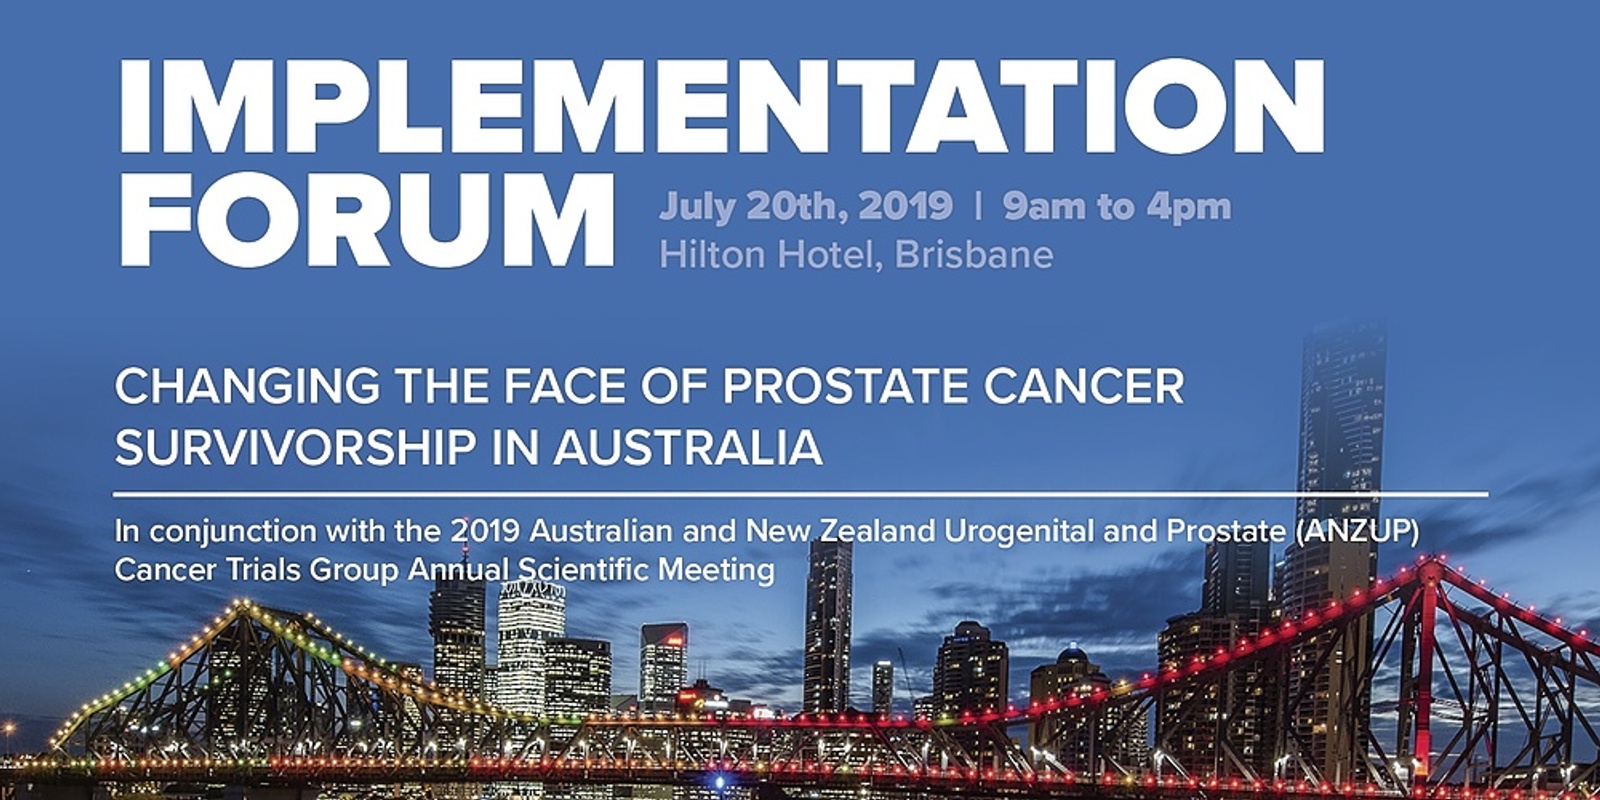 Banner image for Changing the Face of Prostate Cancer Survivorship in Australia - Implementation Forum 2019